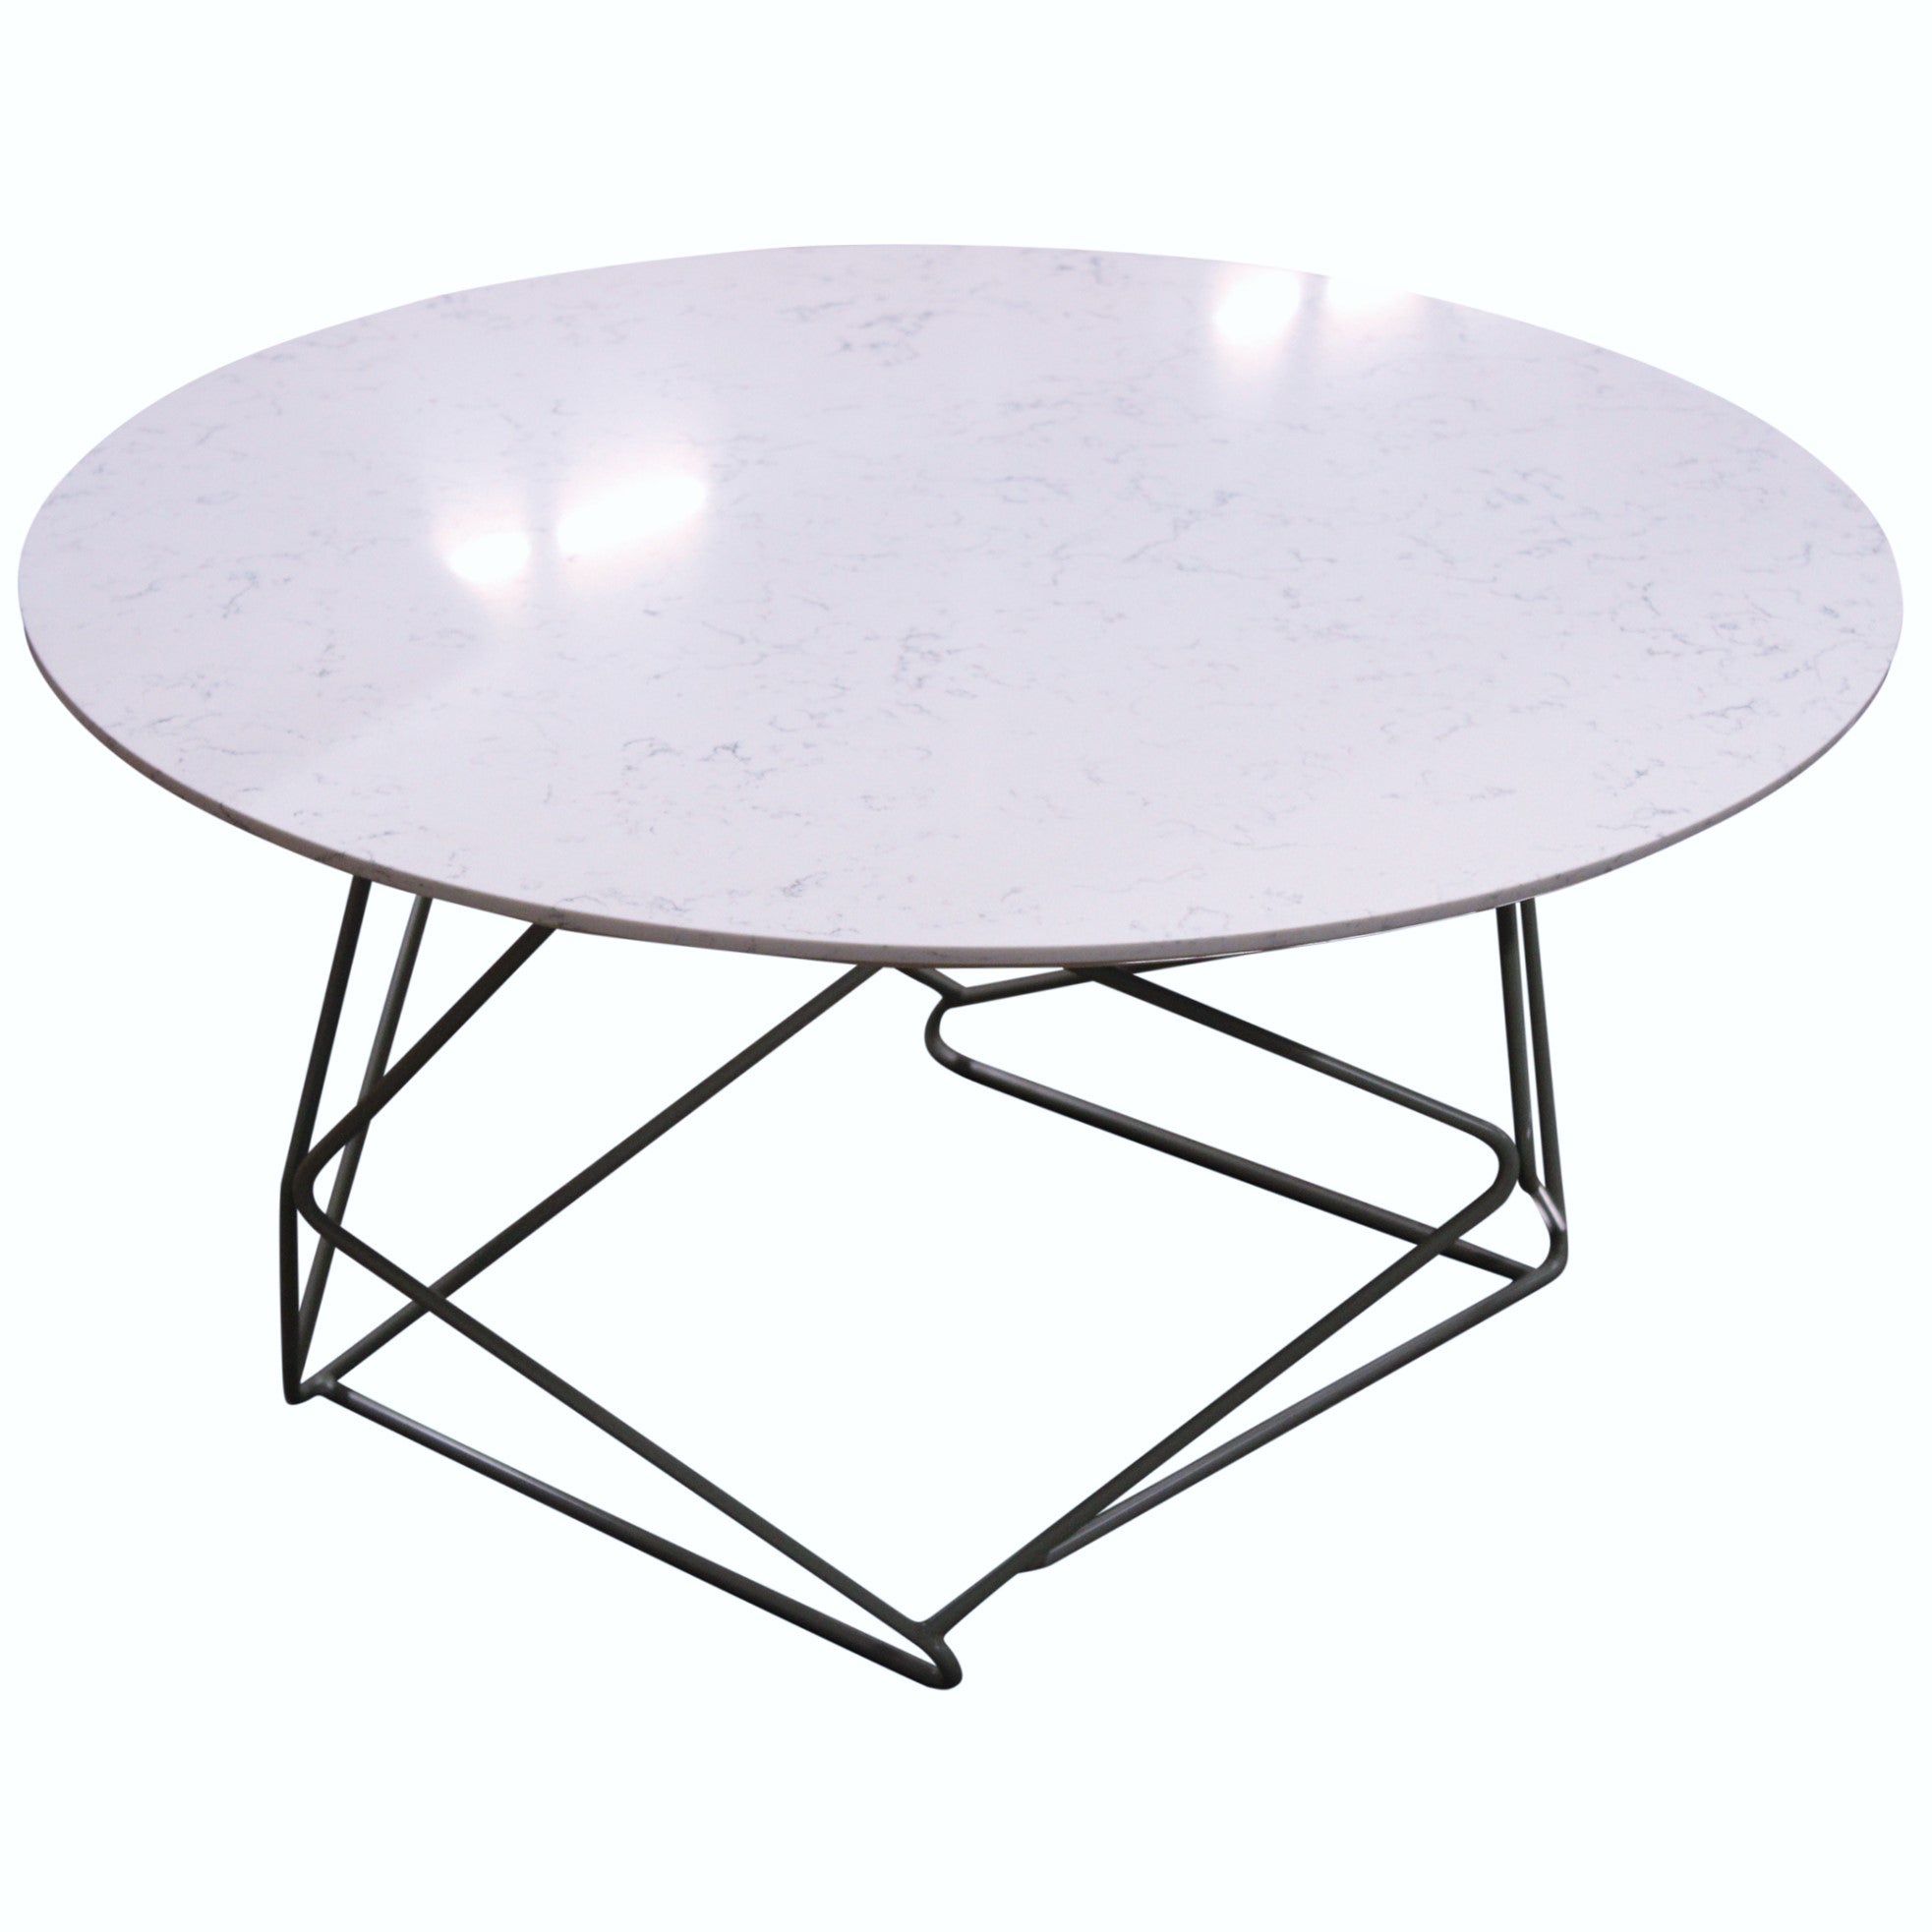 OFS Maive Occasional Table, White - Preowned